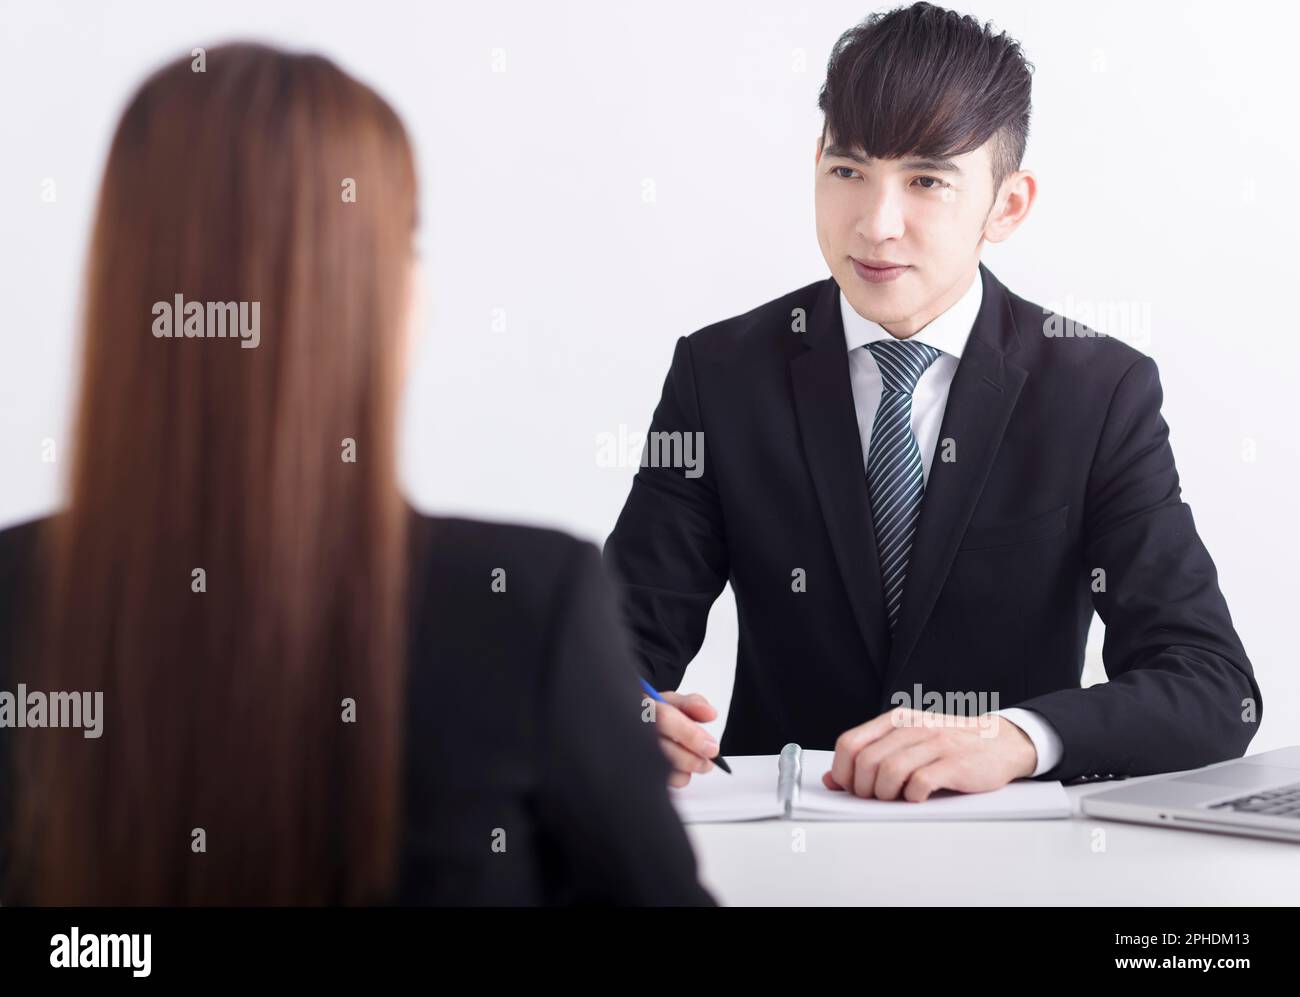 Business manager interviewing young women job applicant in the office Stock Photo